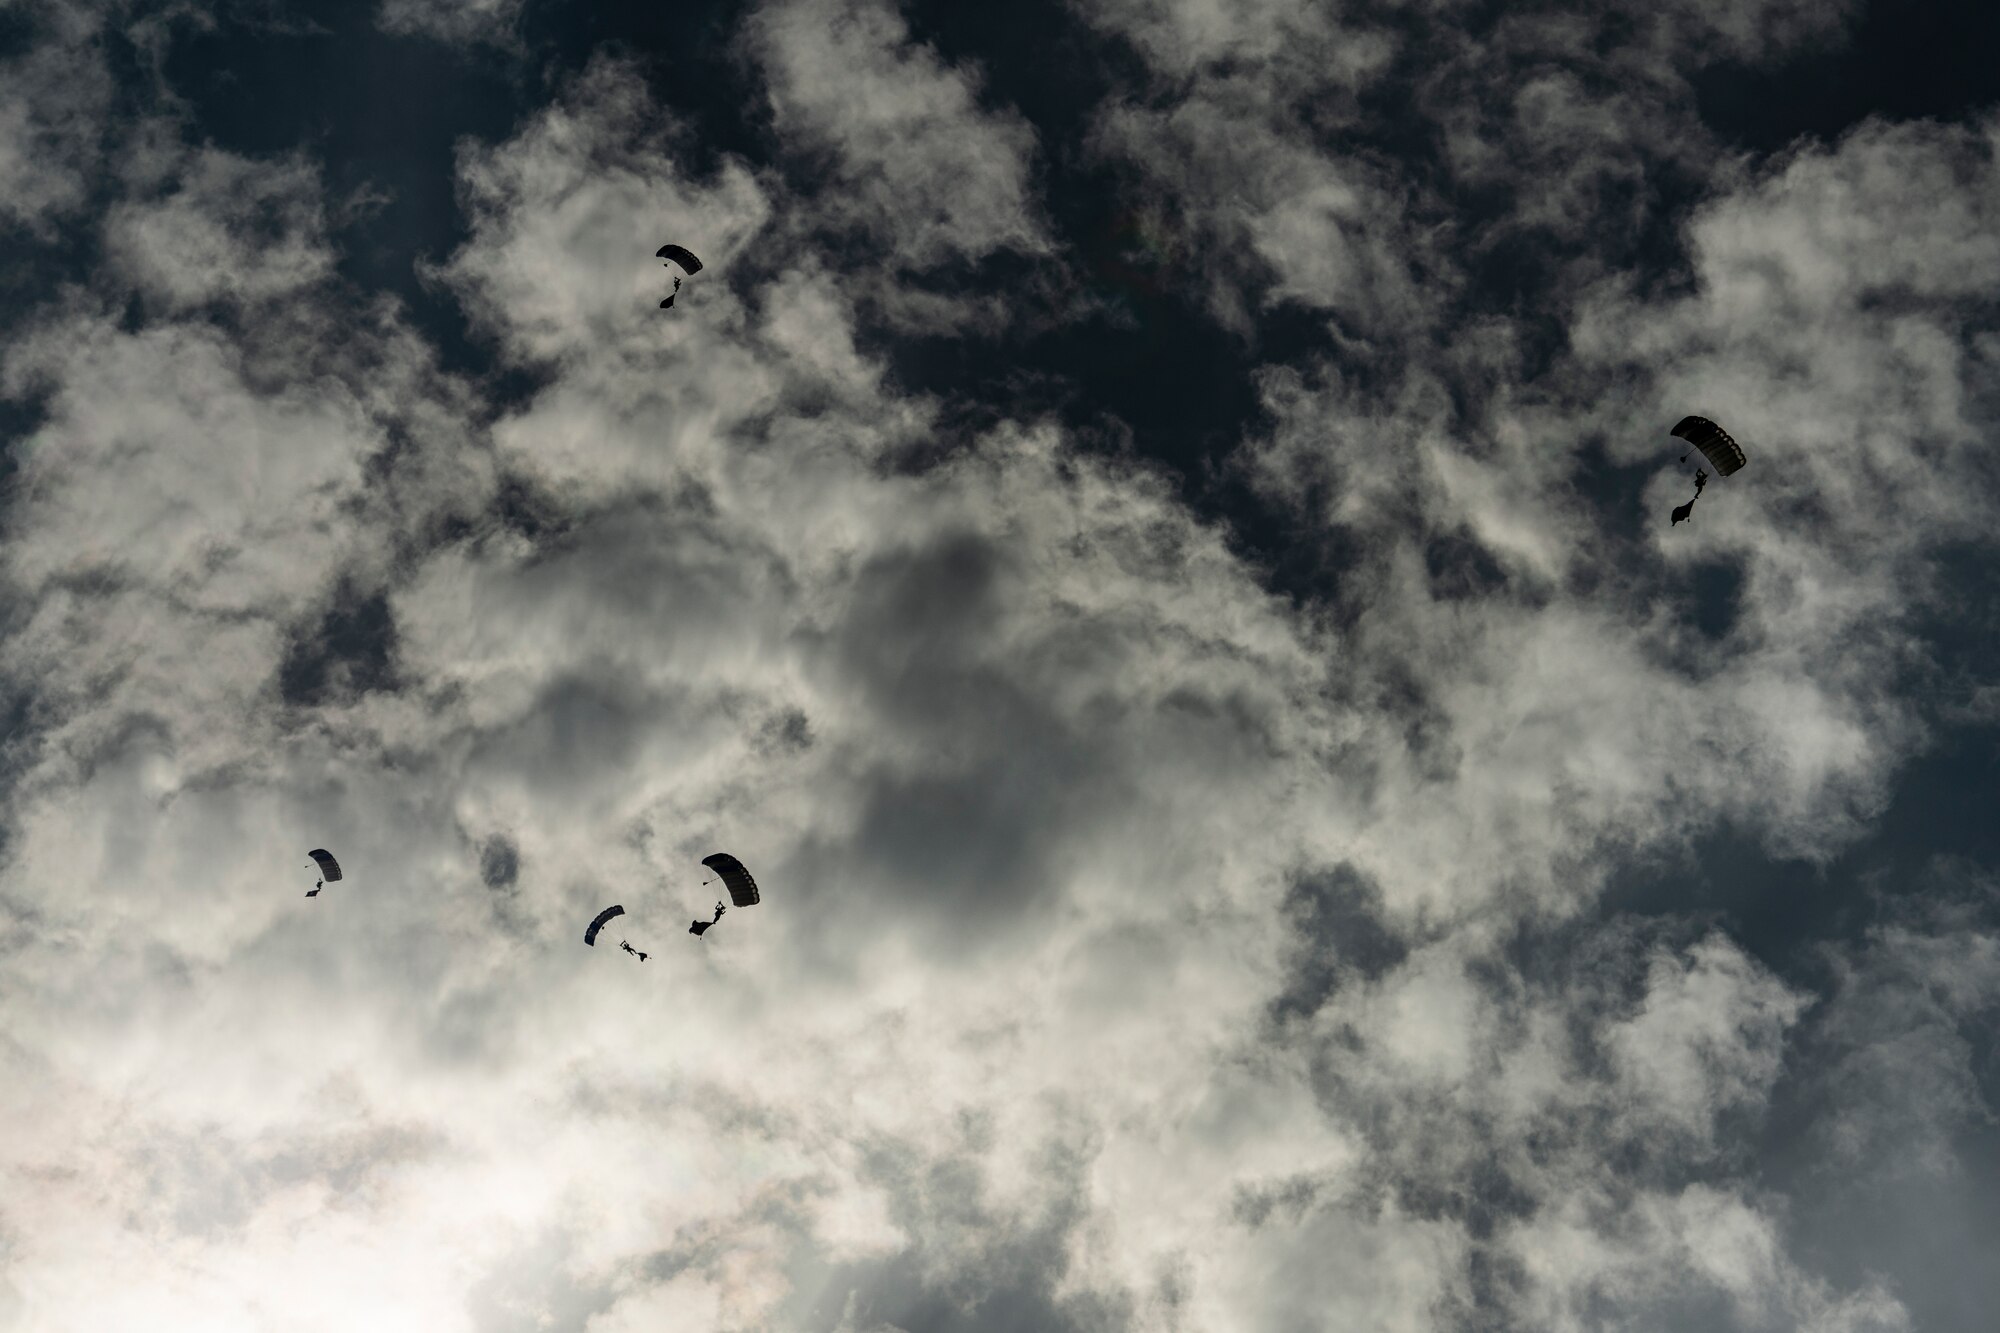 Parachutists descending from the sky